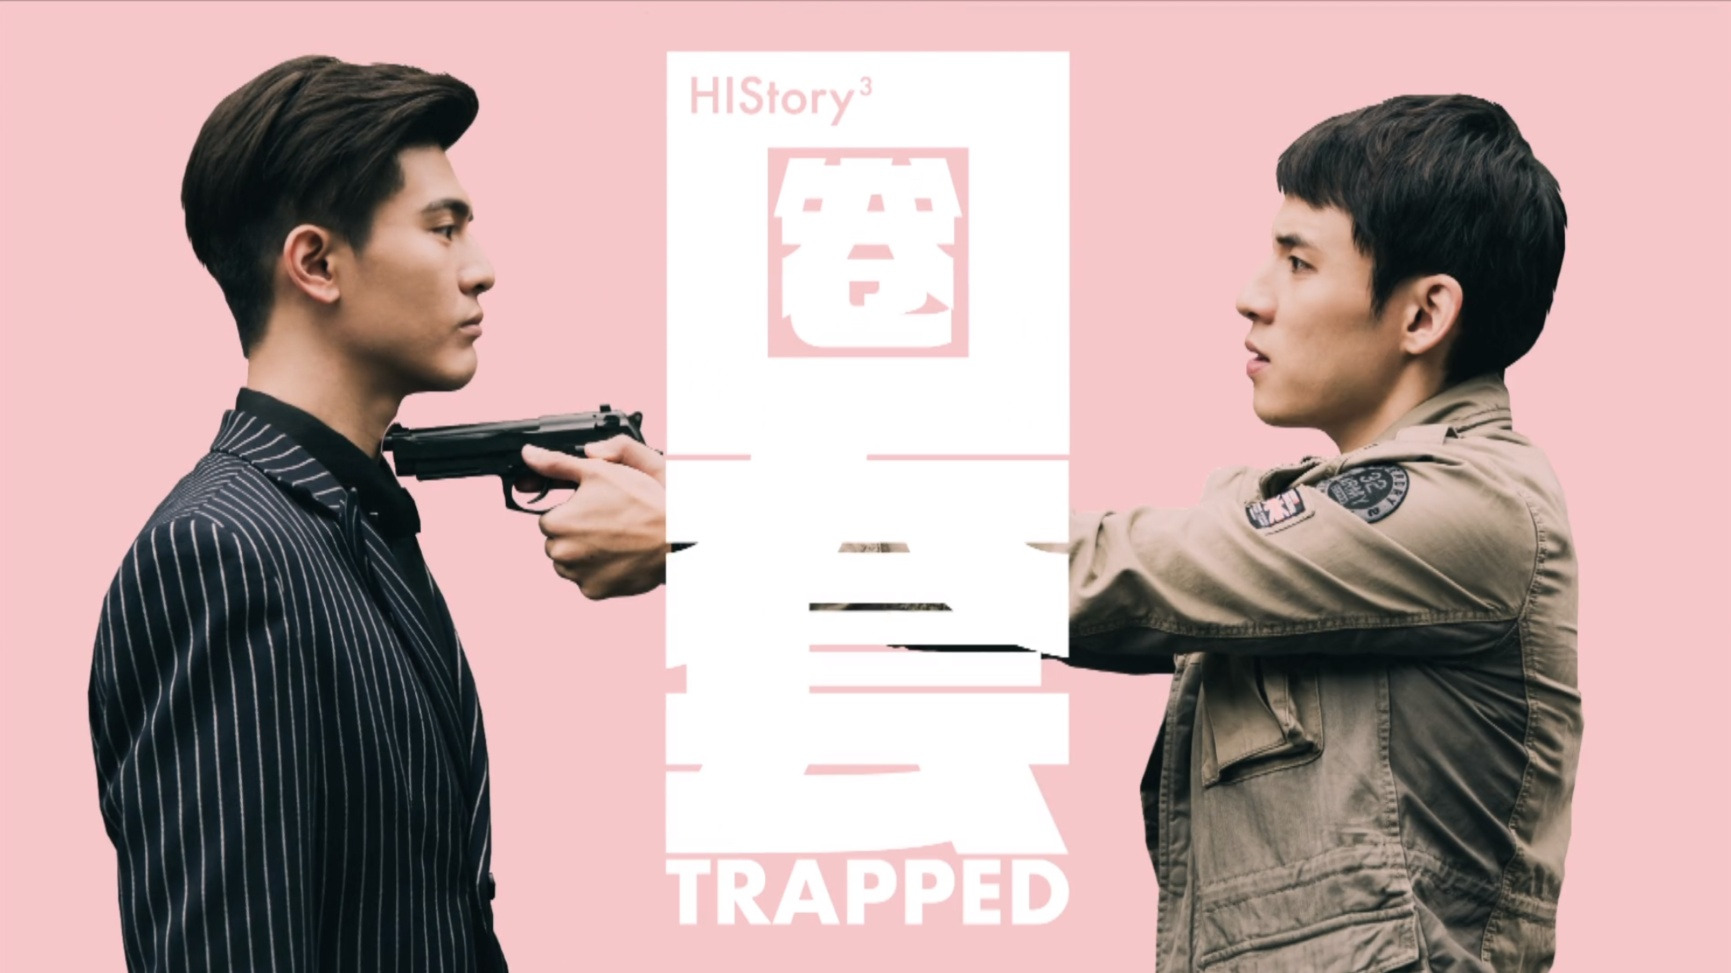 Show HIStory3: Trapped